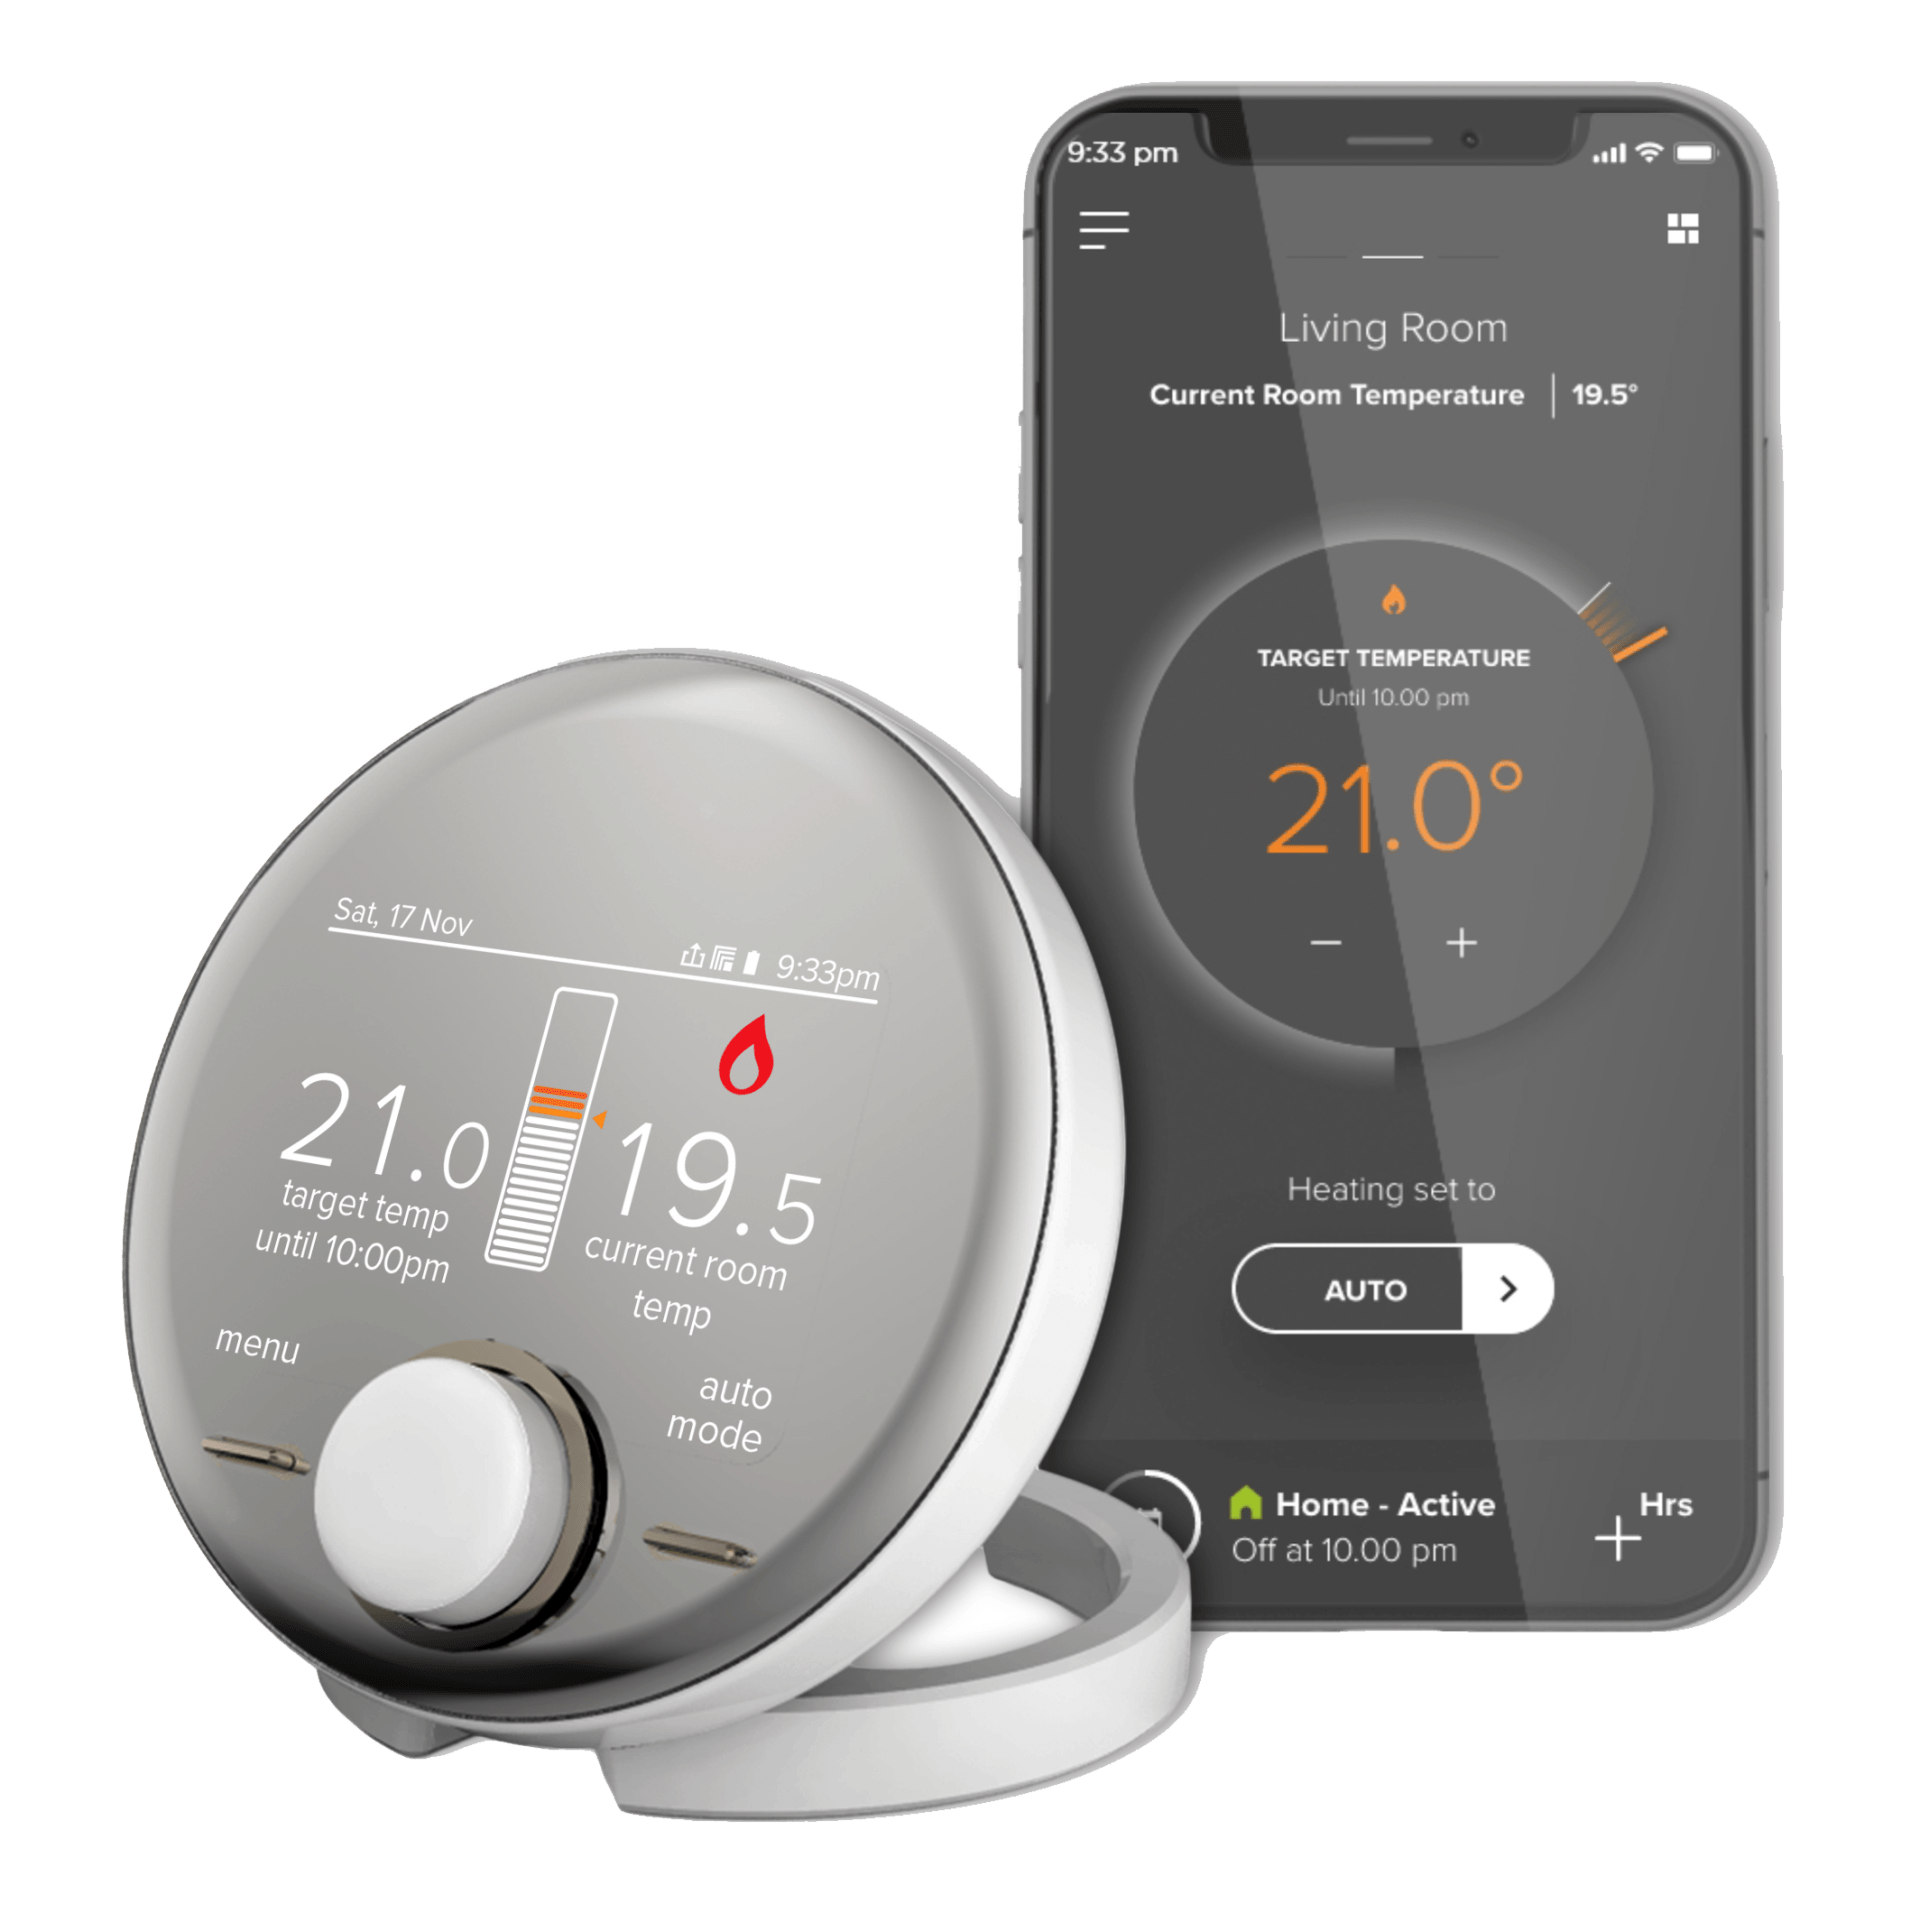 A photo of the Halo smart heating control and app